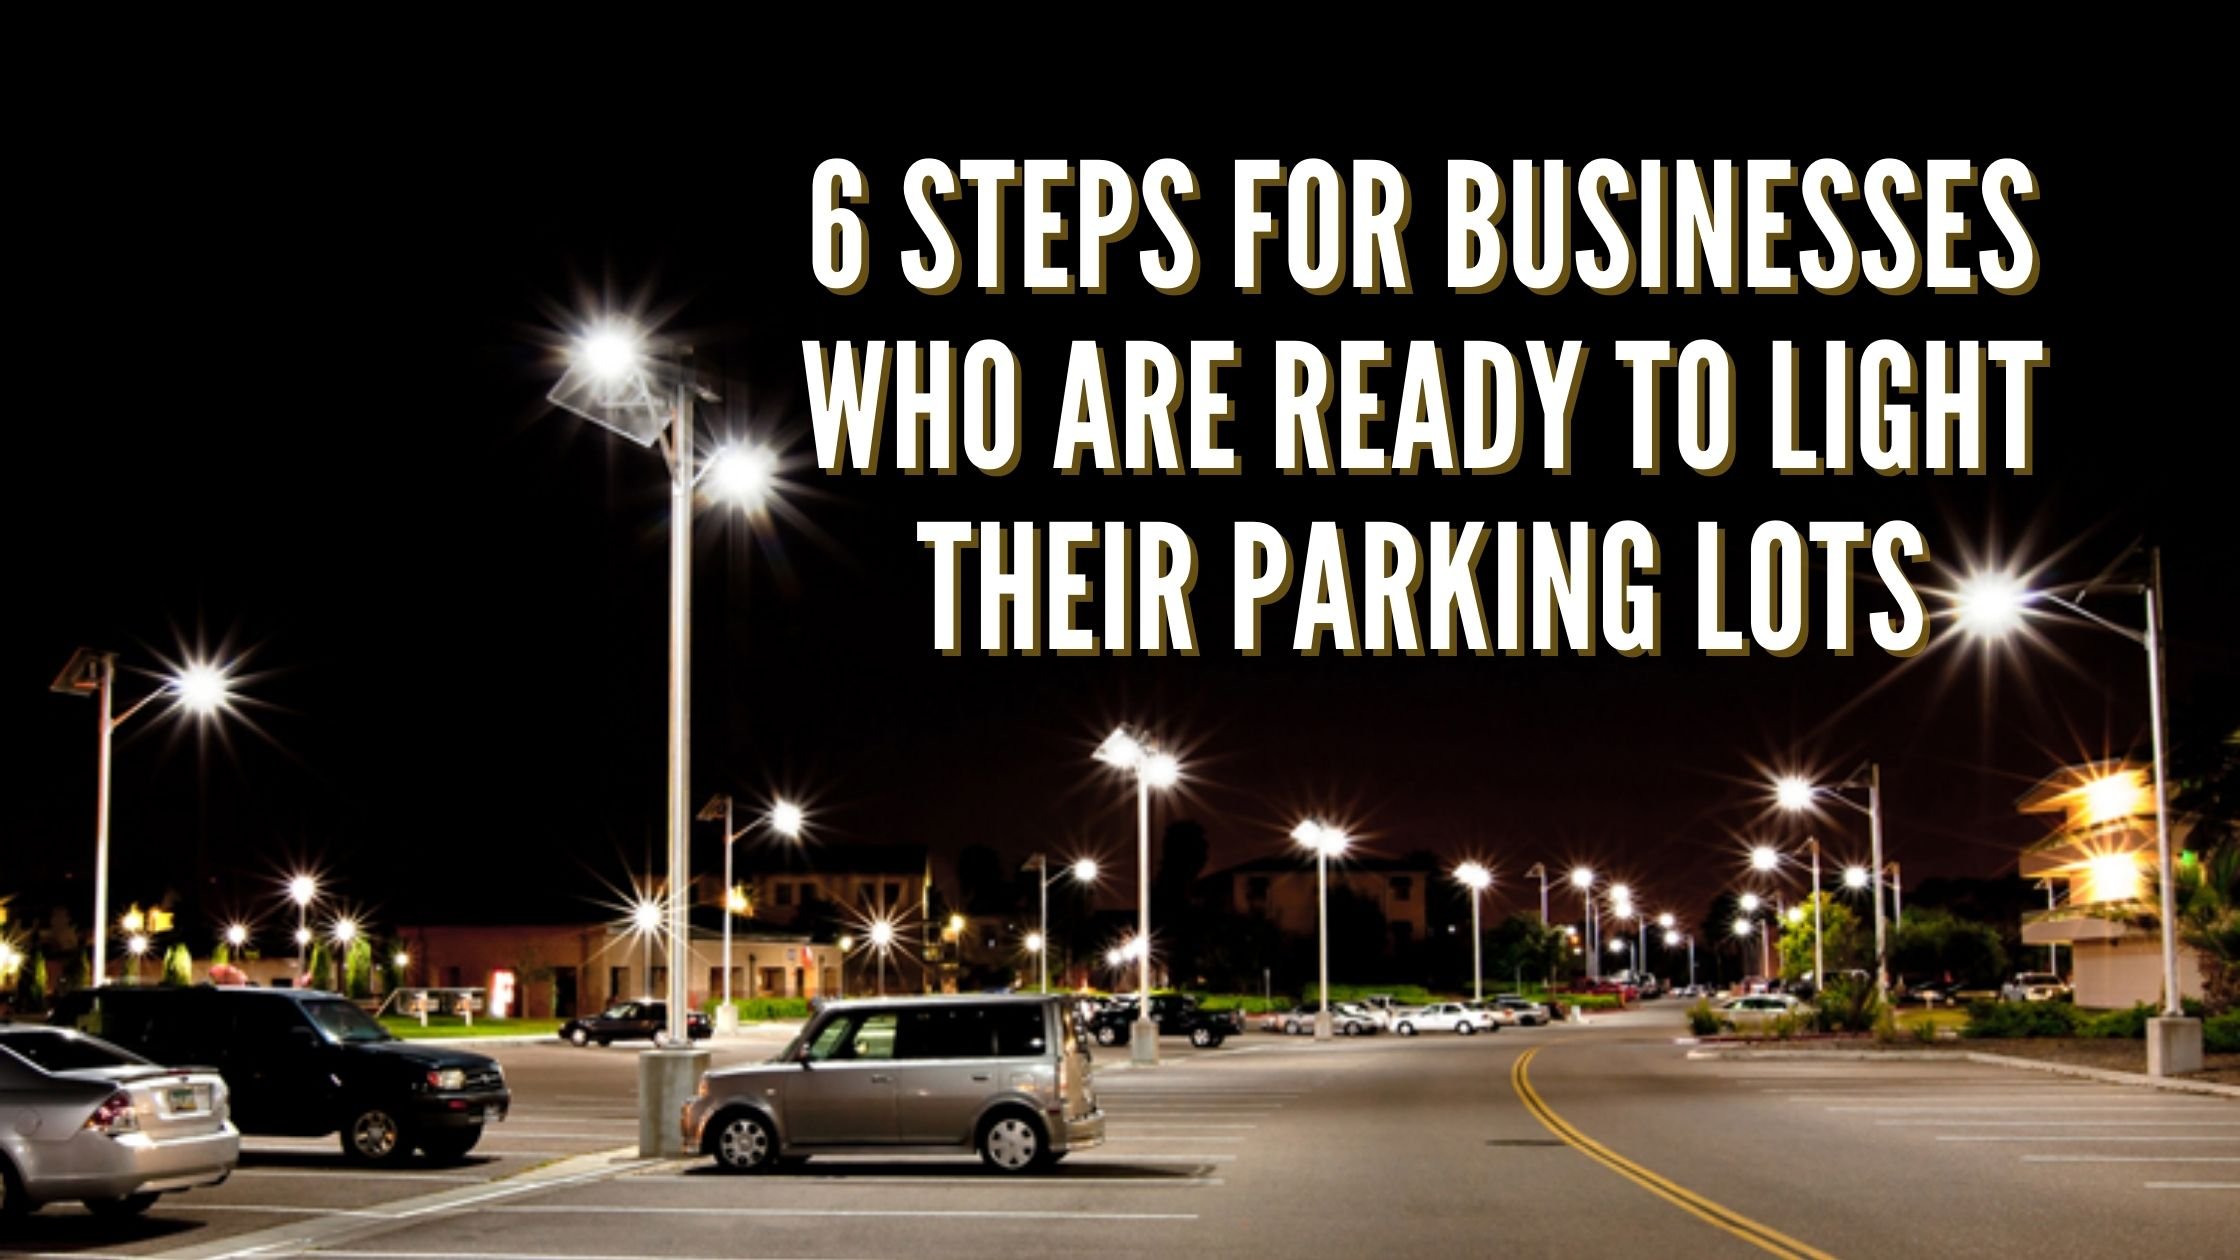 6 Steps for Businesses Who Are Ready to Light Their Parking Lots